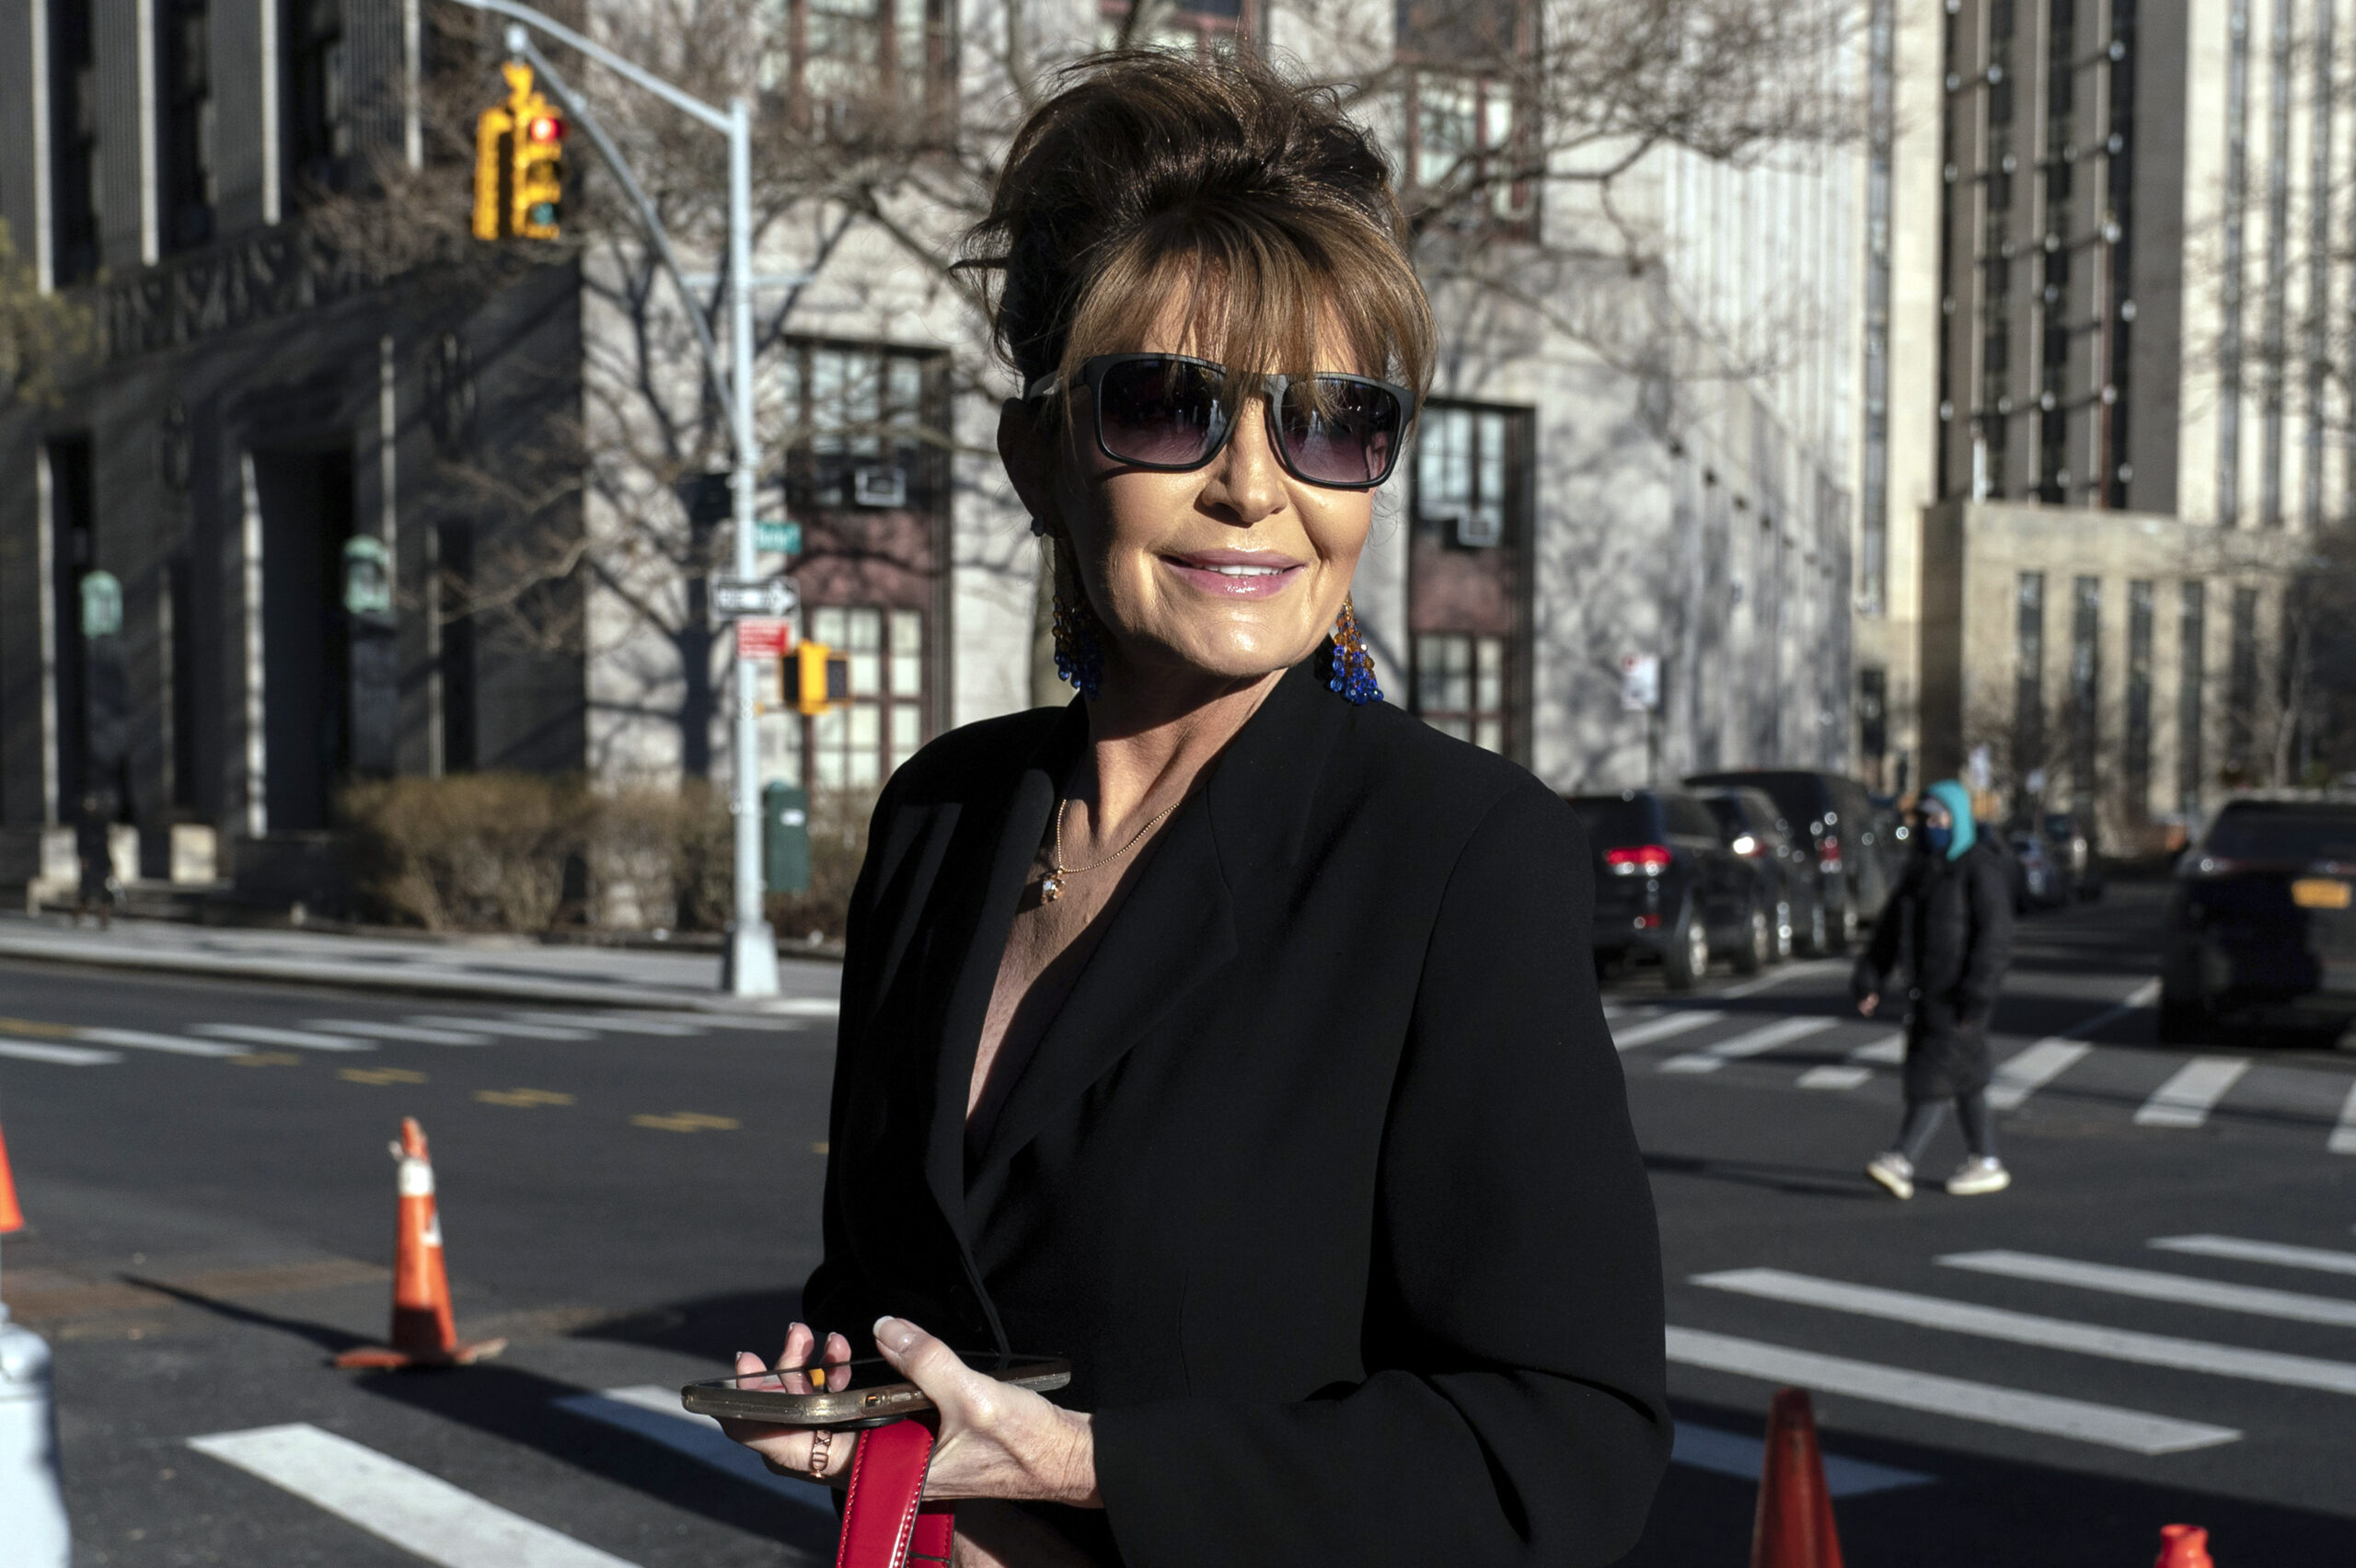 FILE - Former Alaska Gov. Sarah Palin arrives at federal court in New York, Feb. 11, 2022. A judge said Monday he’ll dismiss a libel lawsuit that Palin filed against The New York Times, saying Palin had failed to show that The Times had acted out of malice, something required in libel lawsuits involving public figures. (AP Photo/Jeenah Moon, File)